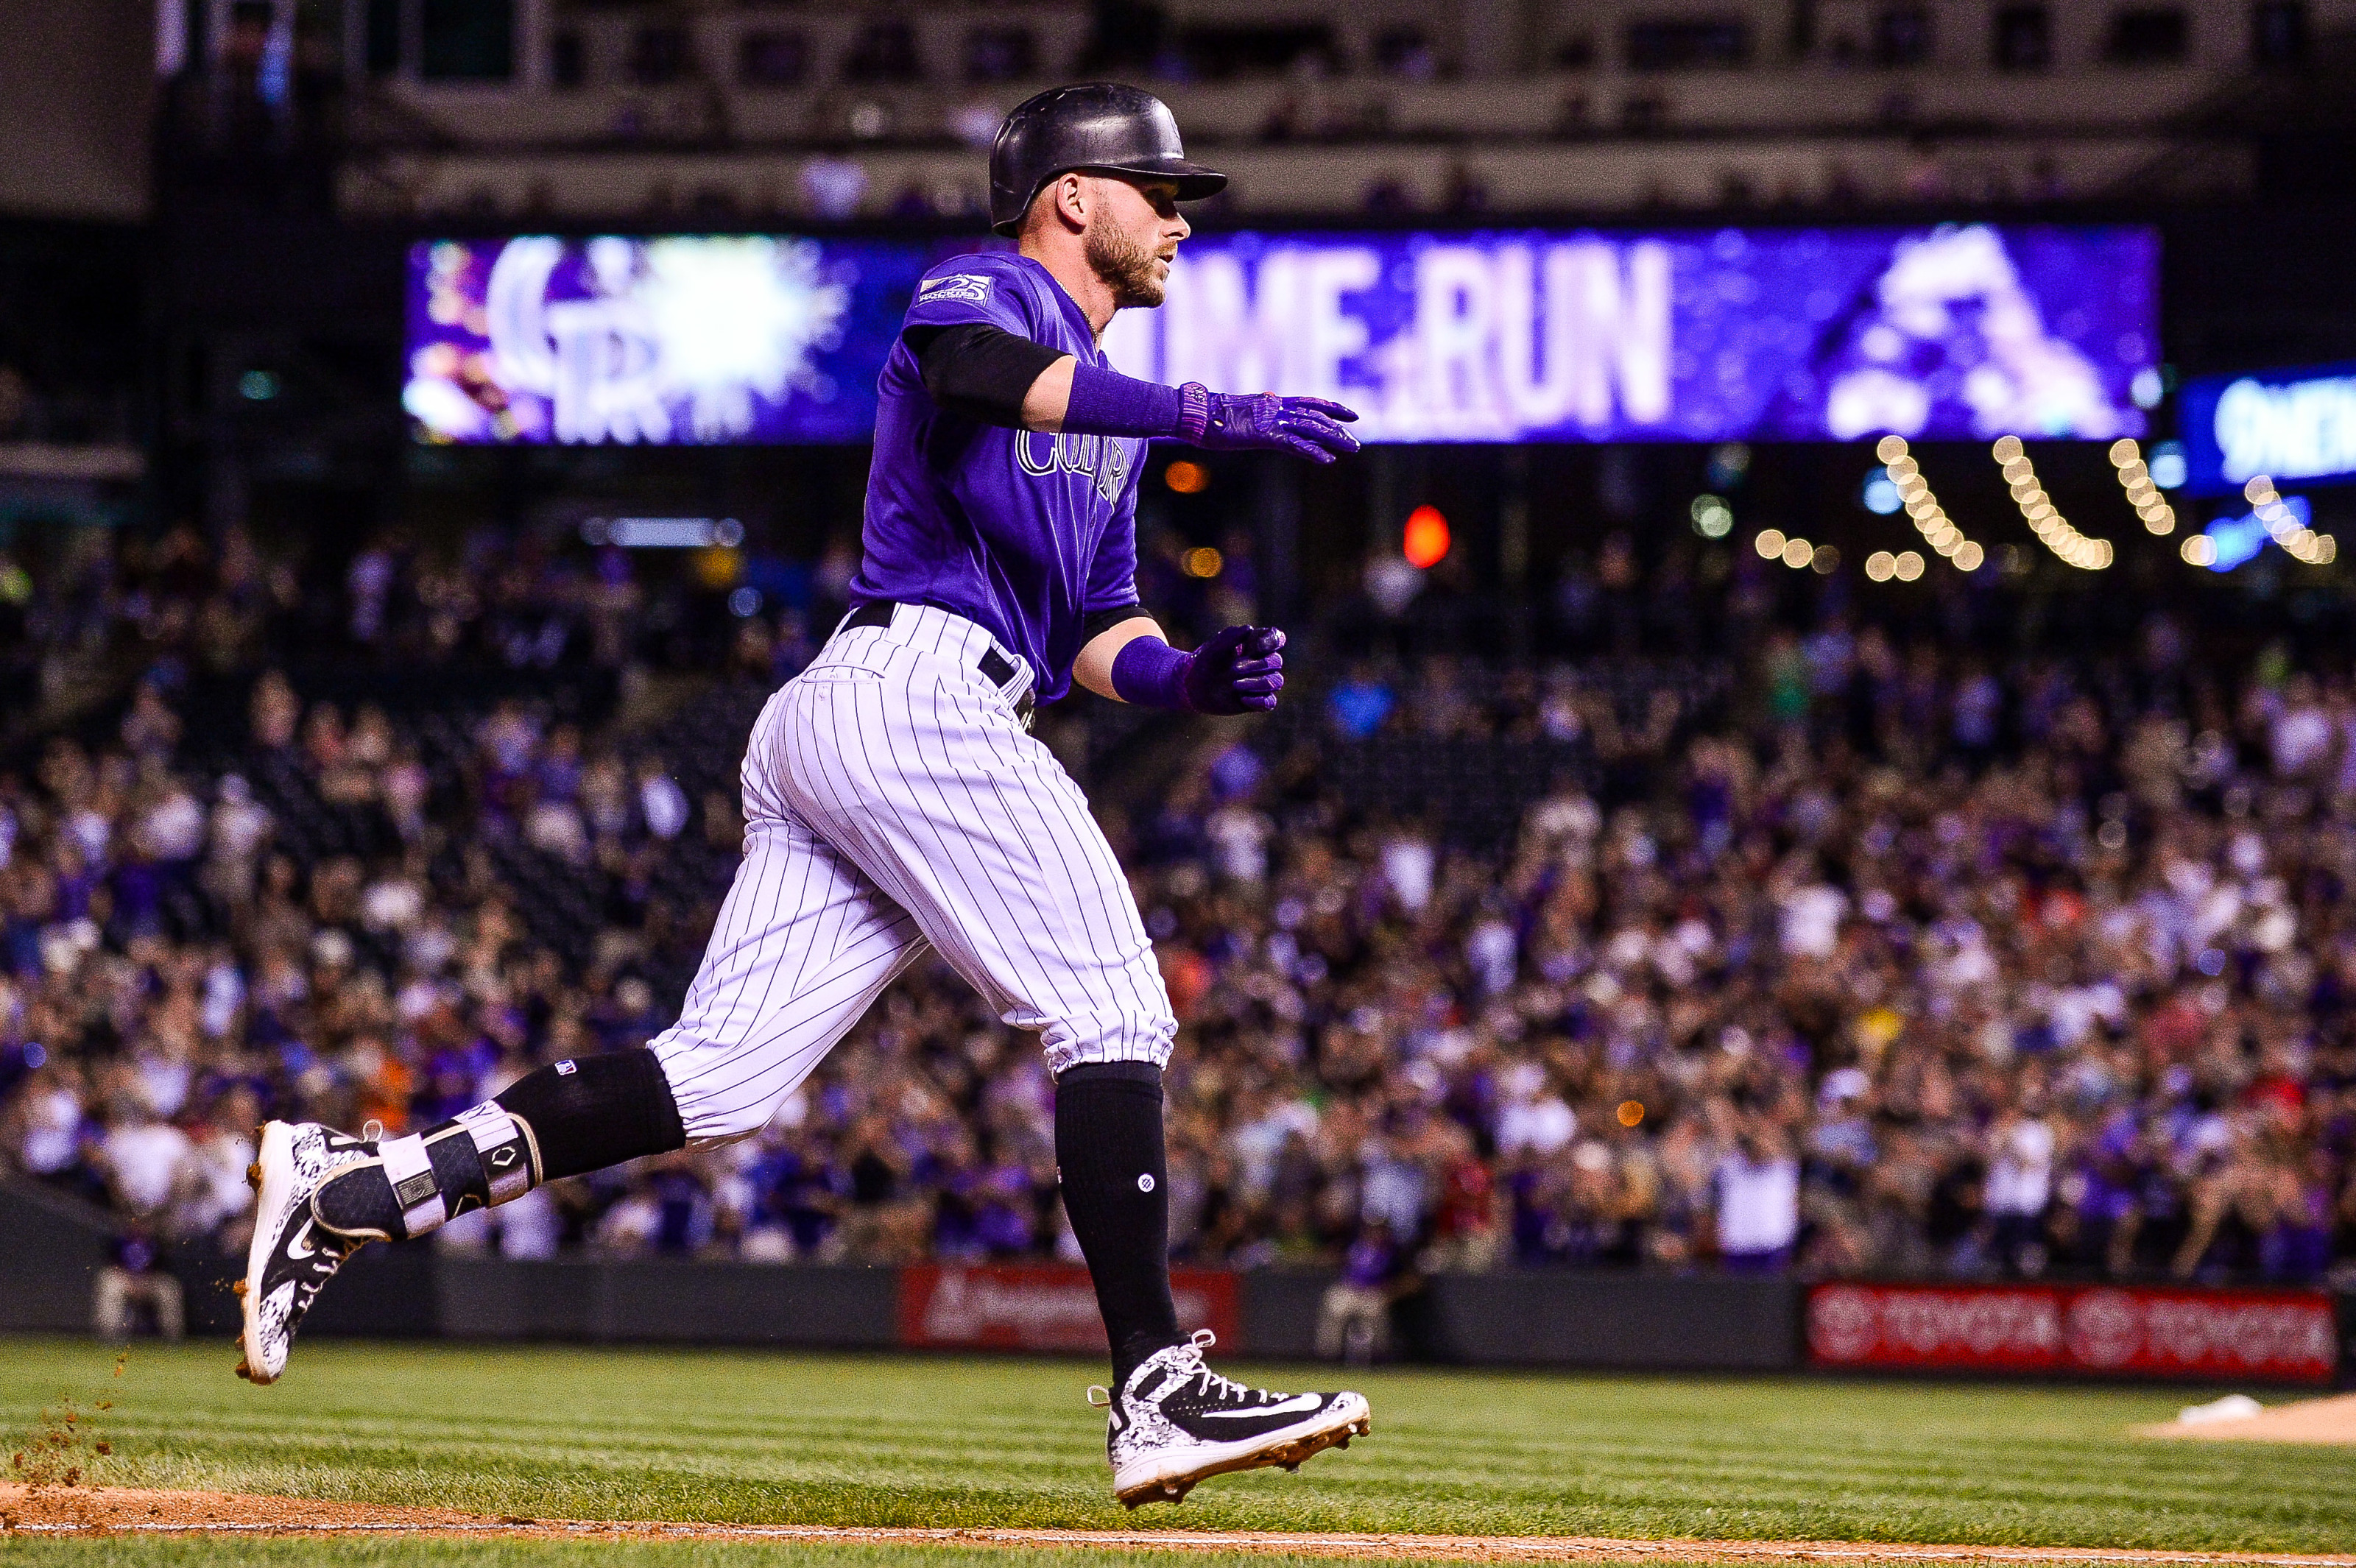 Trevor Story's first week in the majors is one for the record books